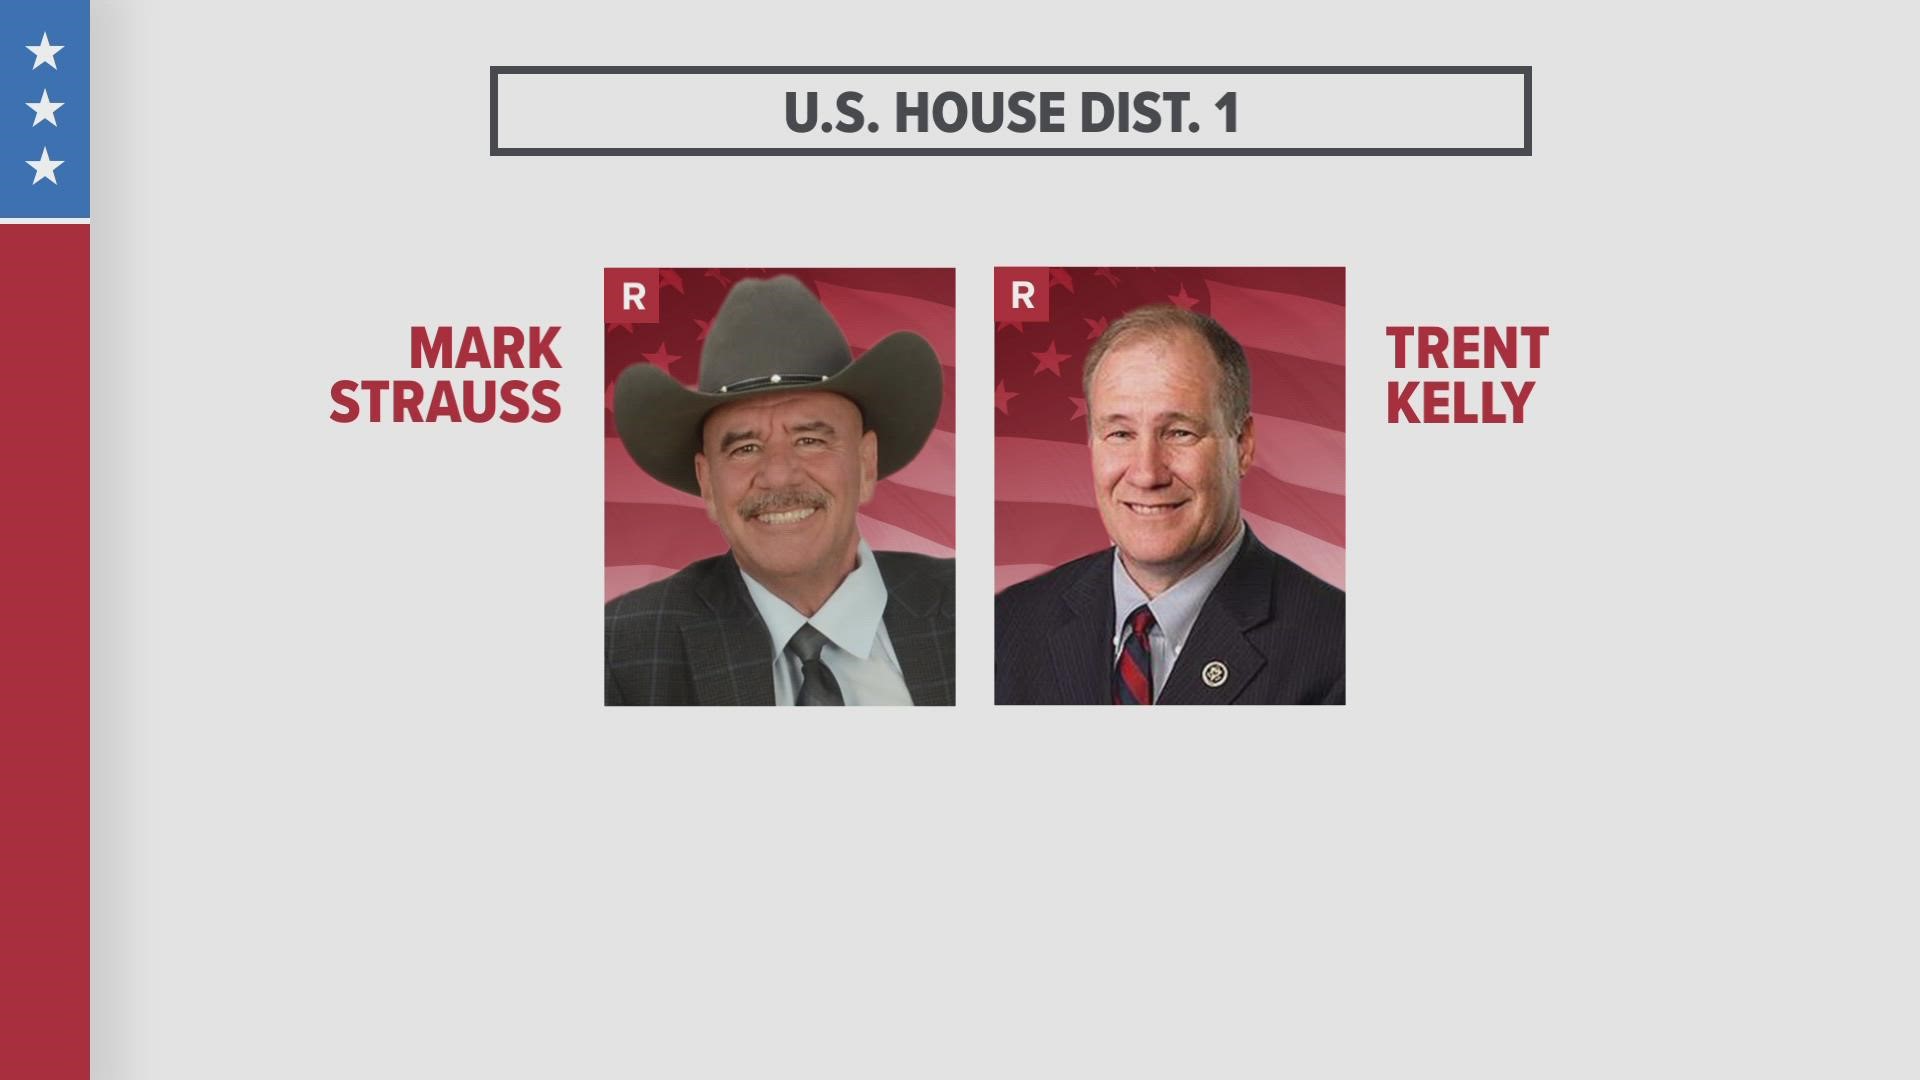 Mark Strauss is challenging incumbent Trent Kelly. On the democratic side, local business owner Dianne Black is taking on Hunter Avery.